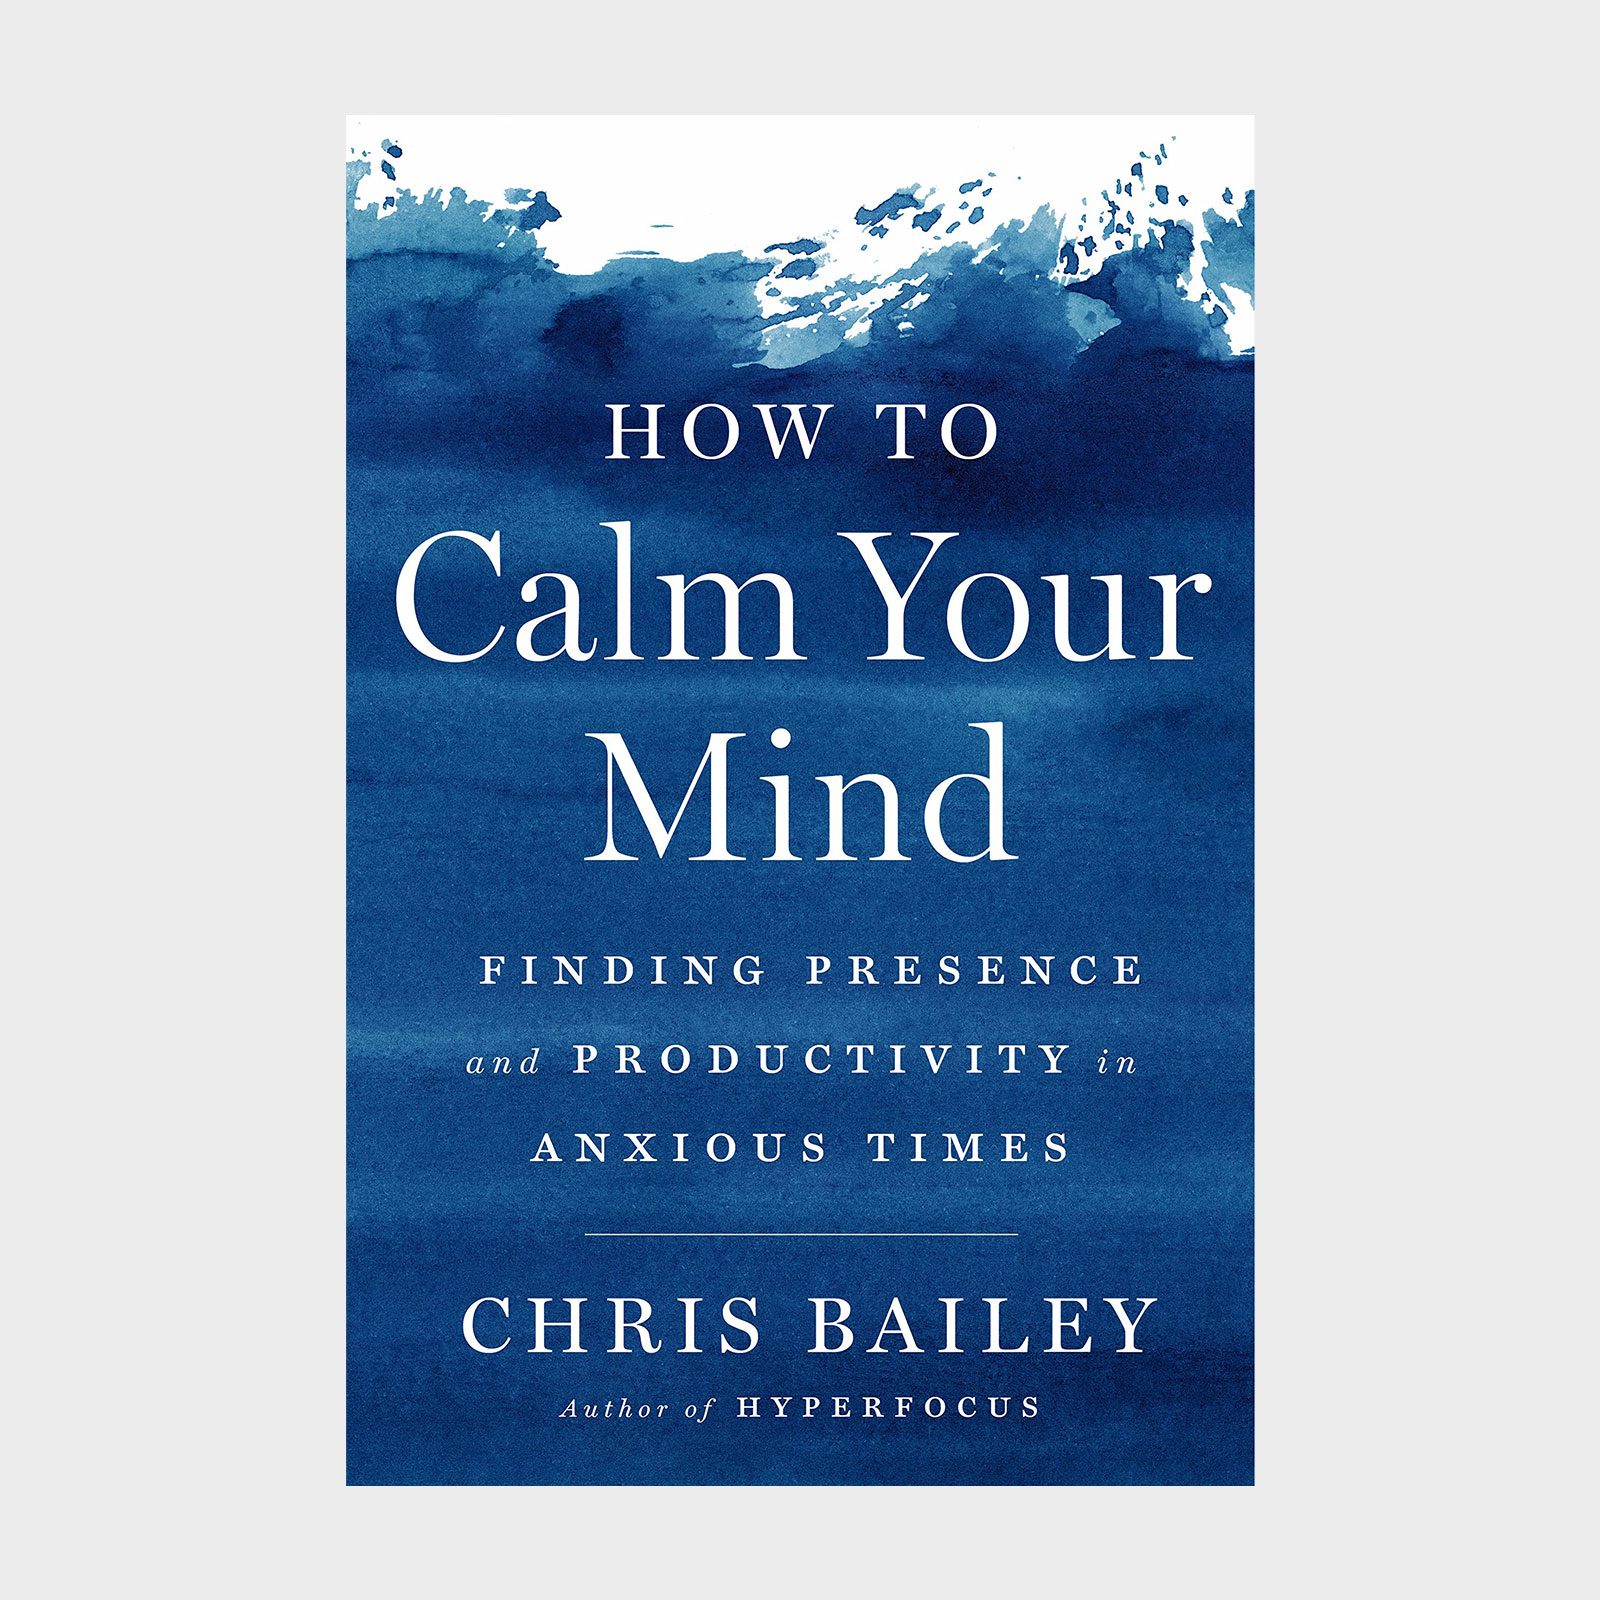 <p>Recently released, in 2022, this science-backed book guides readers to productivity during anxious times. Stress, burnout and exhaustion consumed Chris Bailey before he realized the importance of taking breaks and creating a capacity within his schedule for calm. In <a href="https://www.amazon.com/How-Calm-Your-Mind-Productivity/dp/0593298519" rel="noopener"><em>How to Calm Your Mind</em></a>, Bailey discusses how finding calm and reducing our mental load can lead to a more fulfilled life, and for those looking to become more engaged and focused, Bailey's teachings can help.</p> <p class="listicle-page__cta-button-shop"><a class="shop-btn" href="https://www.amazon.com/How-Calm-Your-Mind-Productivity/dp/0593298519/">Shop Now</a></p>